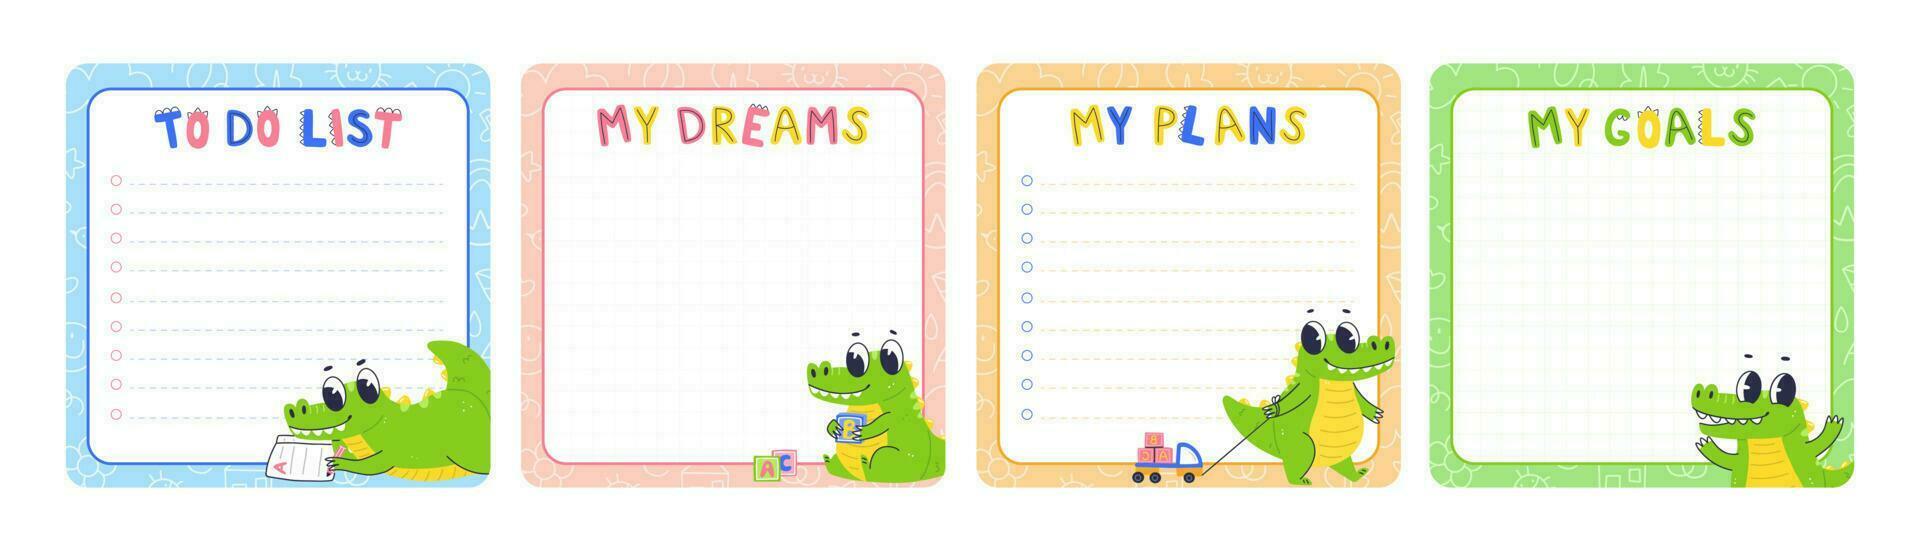 Paper children's notebook design with cartoon crocodile character. Ready-made design of multi-colored notebook pages template vector